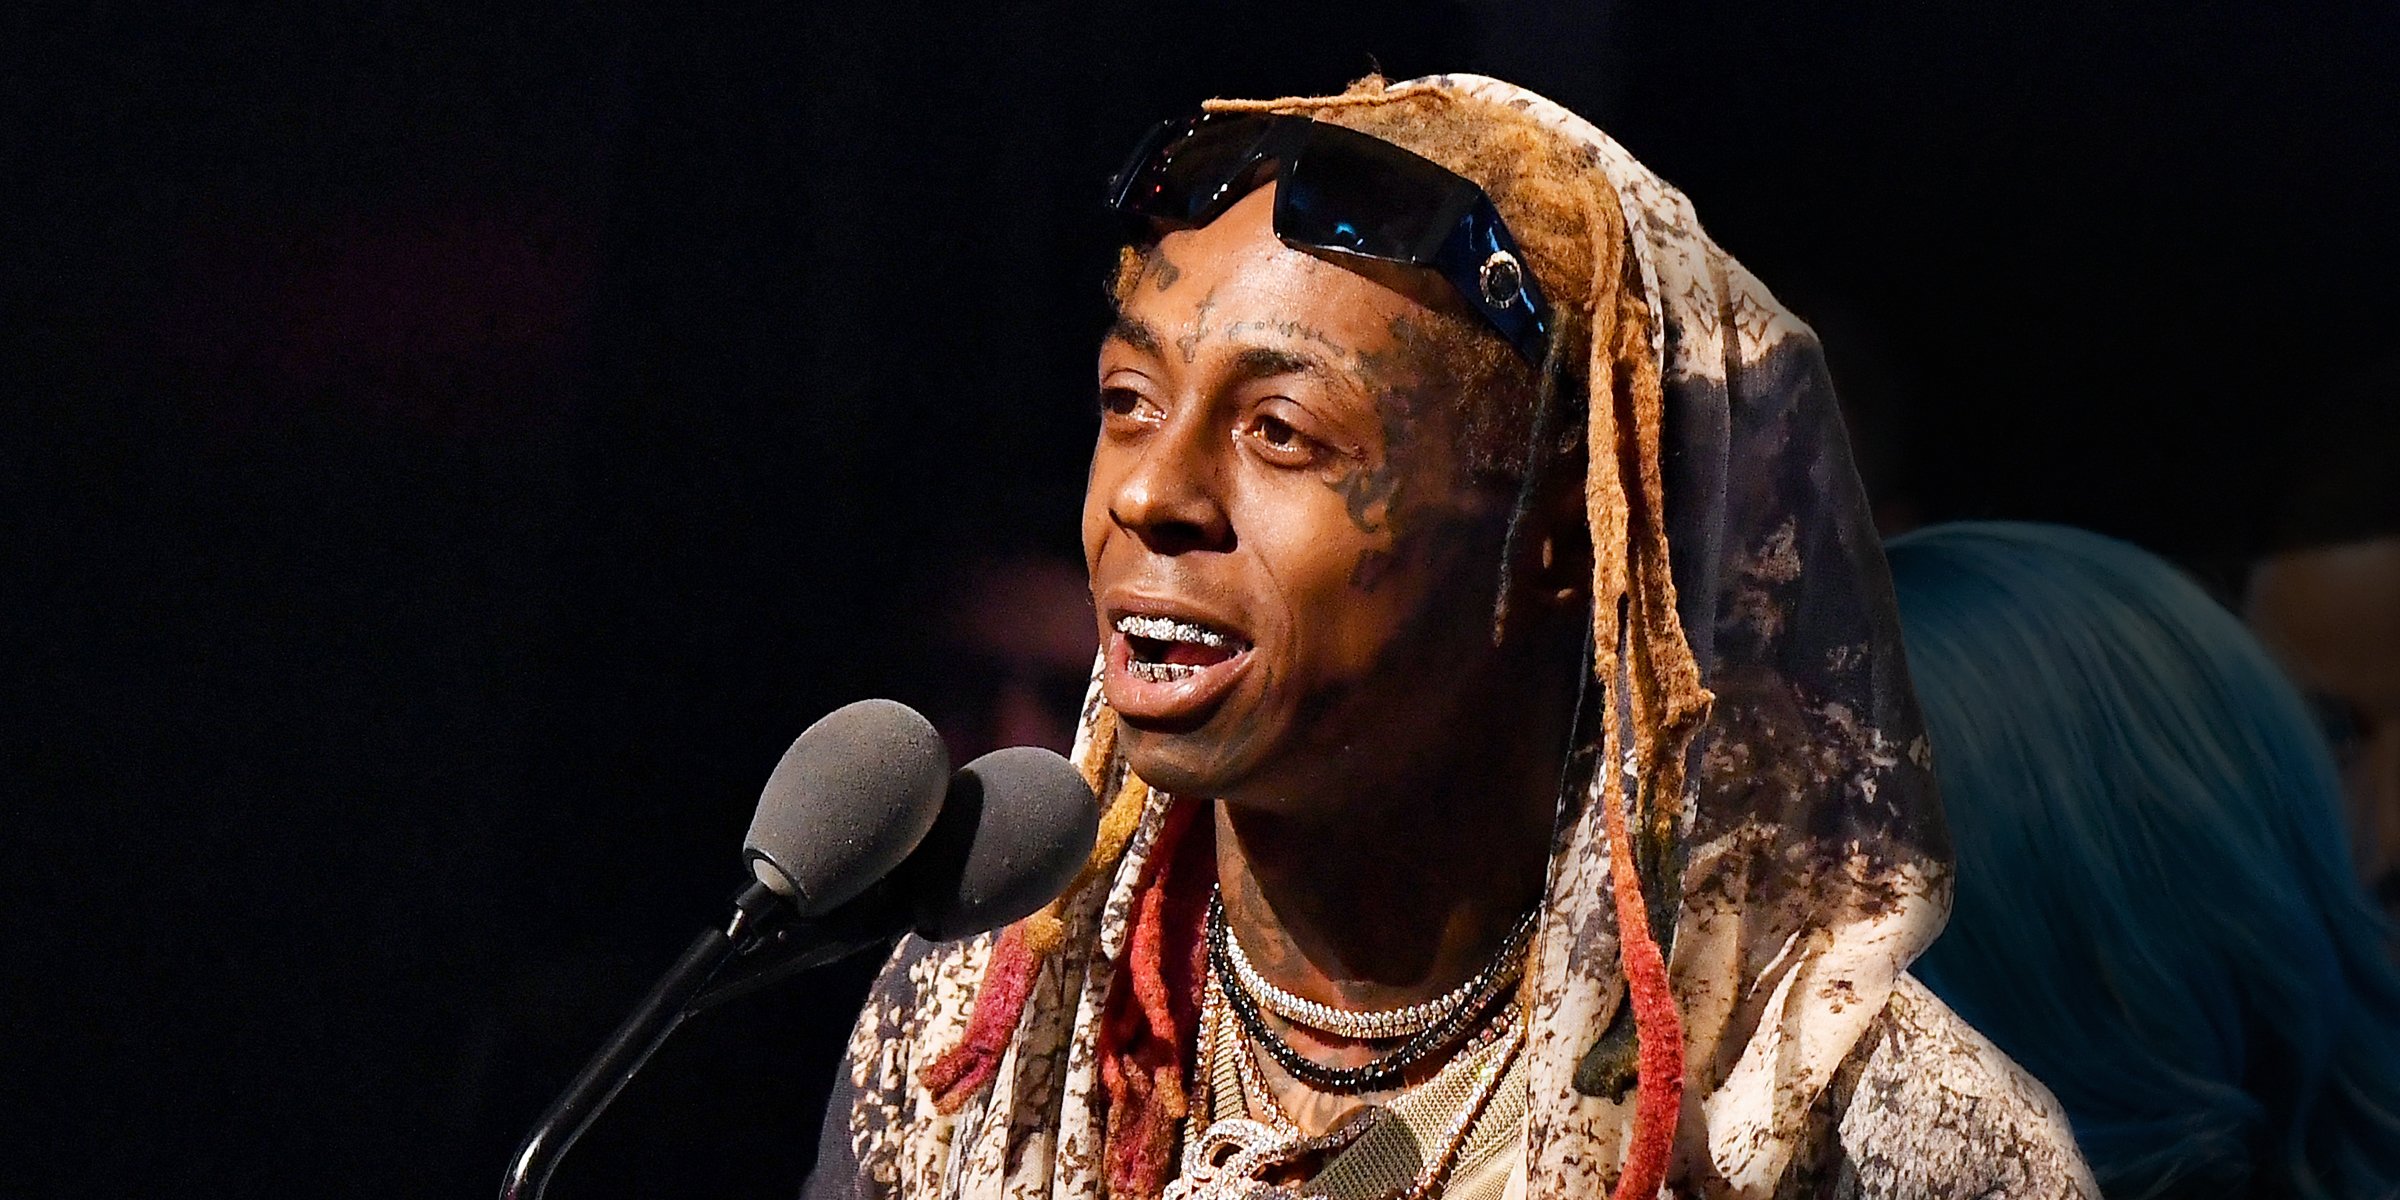 Lil Wayne | Source: Getty Images